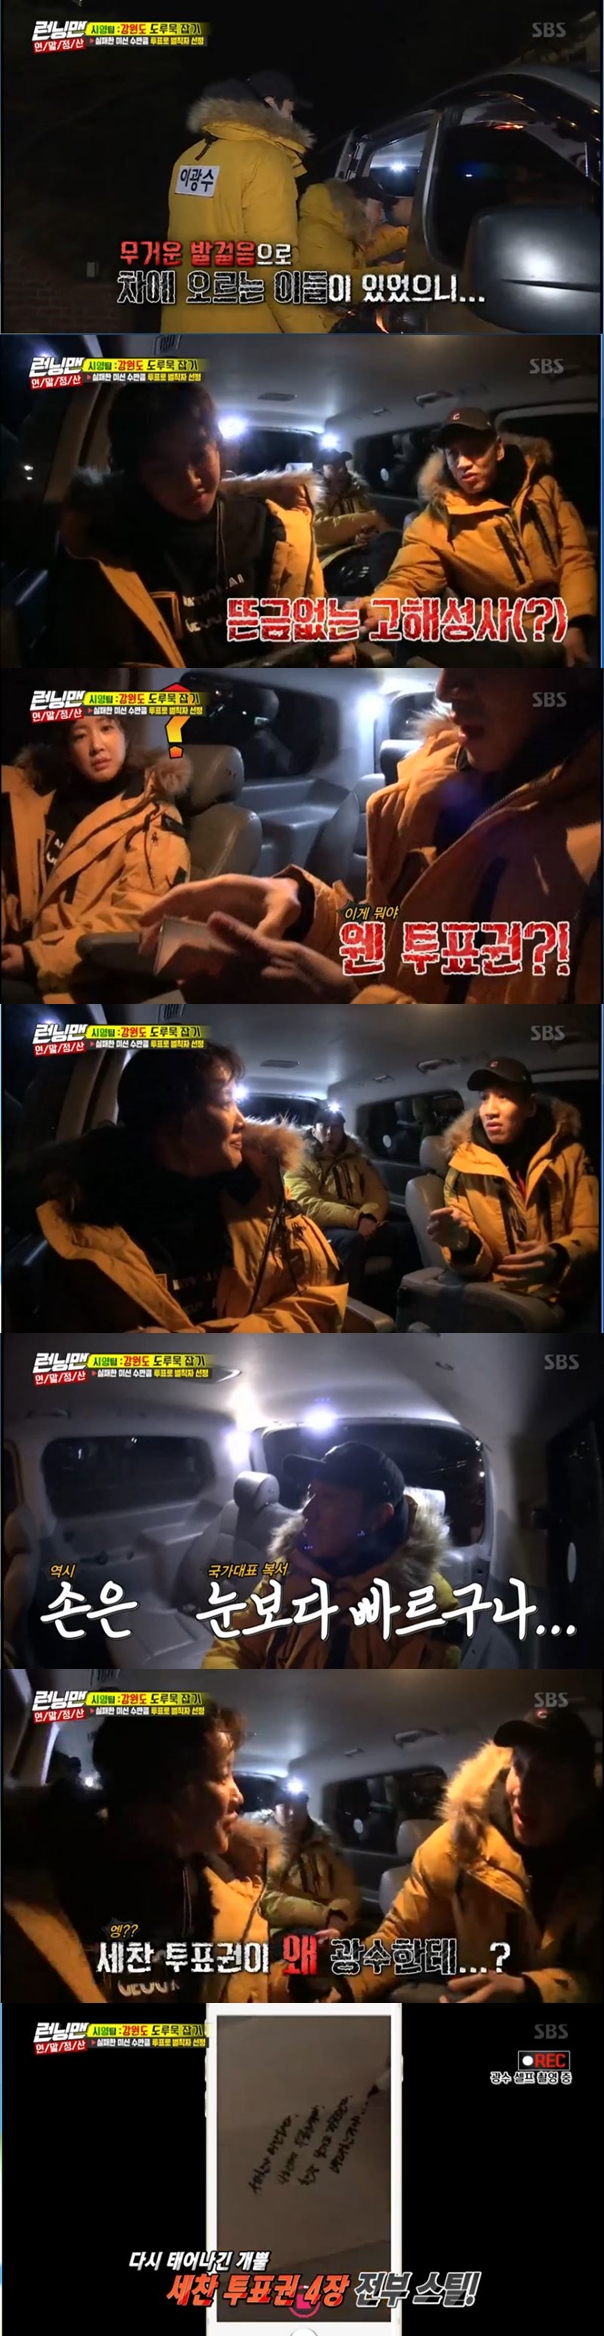 Lee Kwang-soo has not changed.In the SBS entertainment program Running Man broadcasted on the afternoon of the 23rd, Lee Si-young team came out to go fishing with additional mission from dawn.Lee Si-young and Haha and Lee Kwang-soo got into the car to fish at 3am.Lee Kwang-soo, who got into the car, said to Lee Si-young, My sister was born again.Lee Si-young suspected Lee Kwang-soo, saying, Where did this happen?The previous day, Lee Kwang-soo did not believe him because he had taken Lee Si-youngs vote.Lee Kwang-soo was unhappy and informed his accomplishments, saying, I stole the thing. However, Lee Si-young said, I will have the vote once.I helped the team, but I do not believe it, so follow me. Lee Kwang-soo was unfair, but since he had a history, he handed the vote to Lee Si-young and laughed.